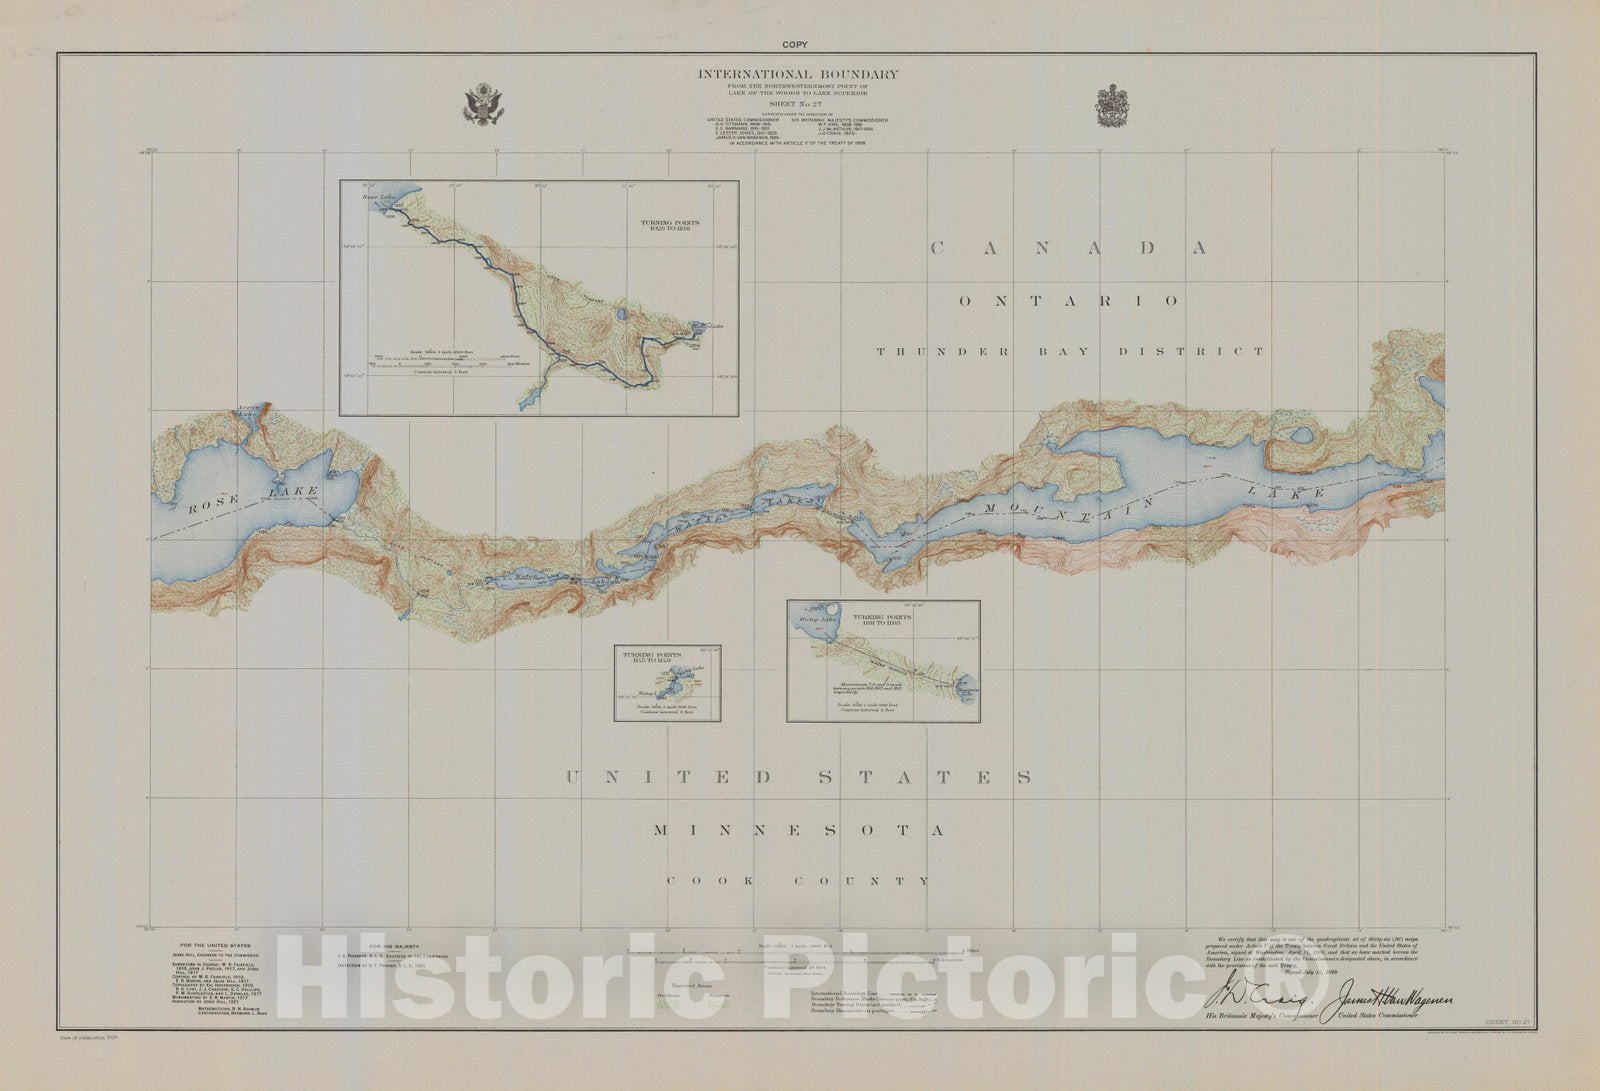 Historic Nautical Map - International Boundary, From The Northwestern Point Of Lake Of The Woods To Lake Superior, Sheet No.27, MN, 1929 NOAA Topographic - Vintage Decor Poster Wall Art Reproduction - 0